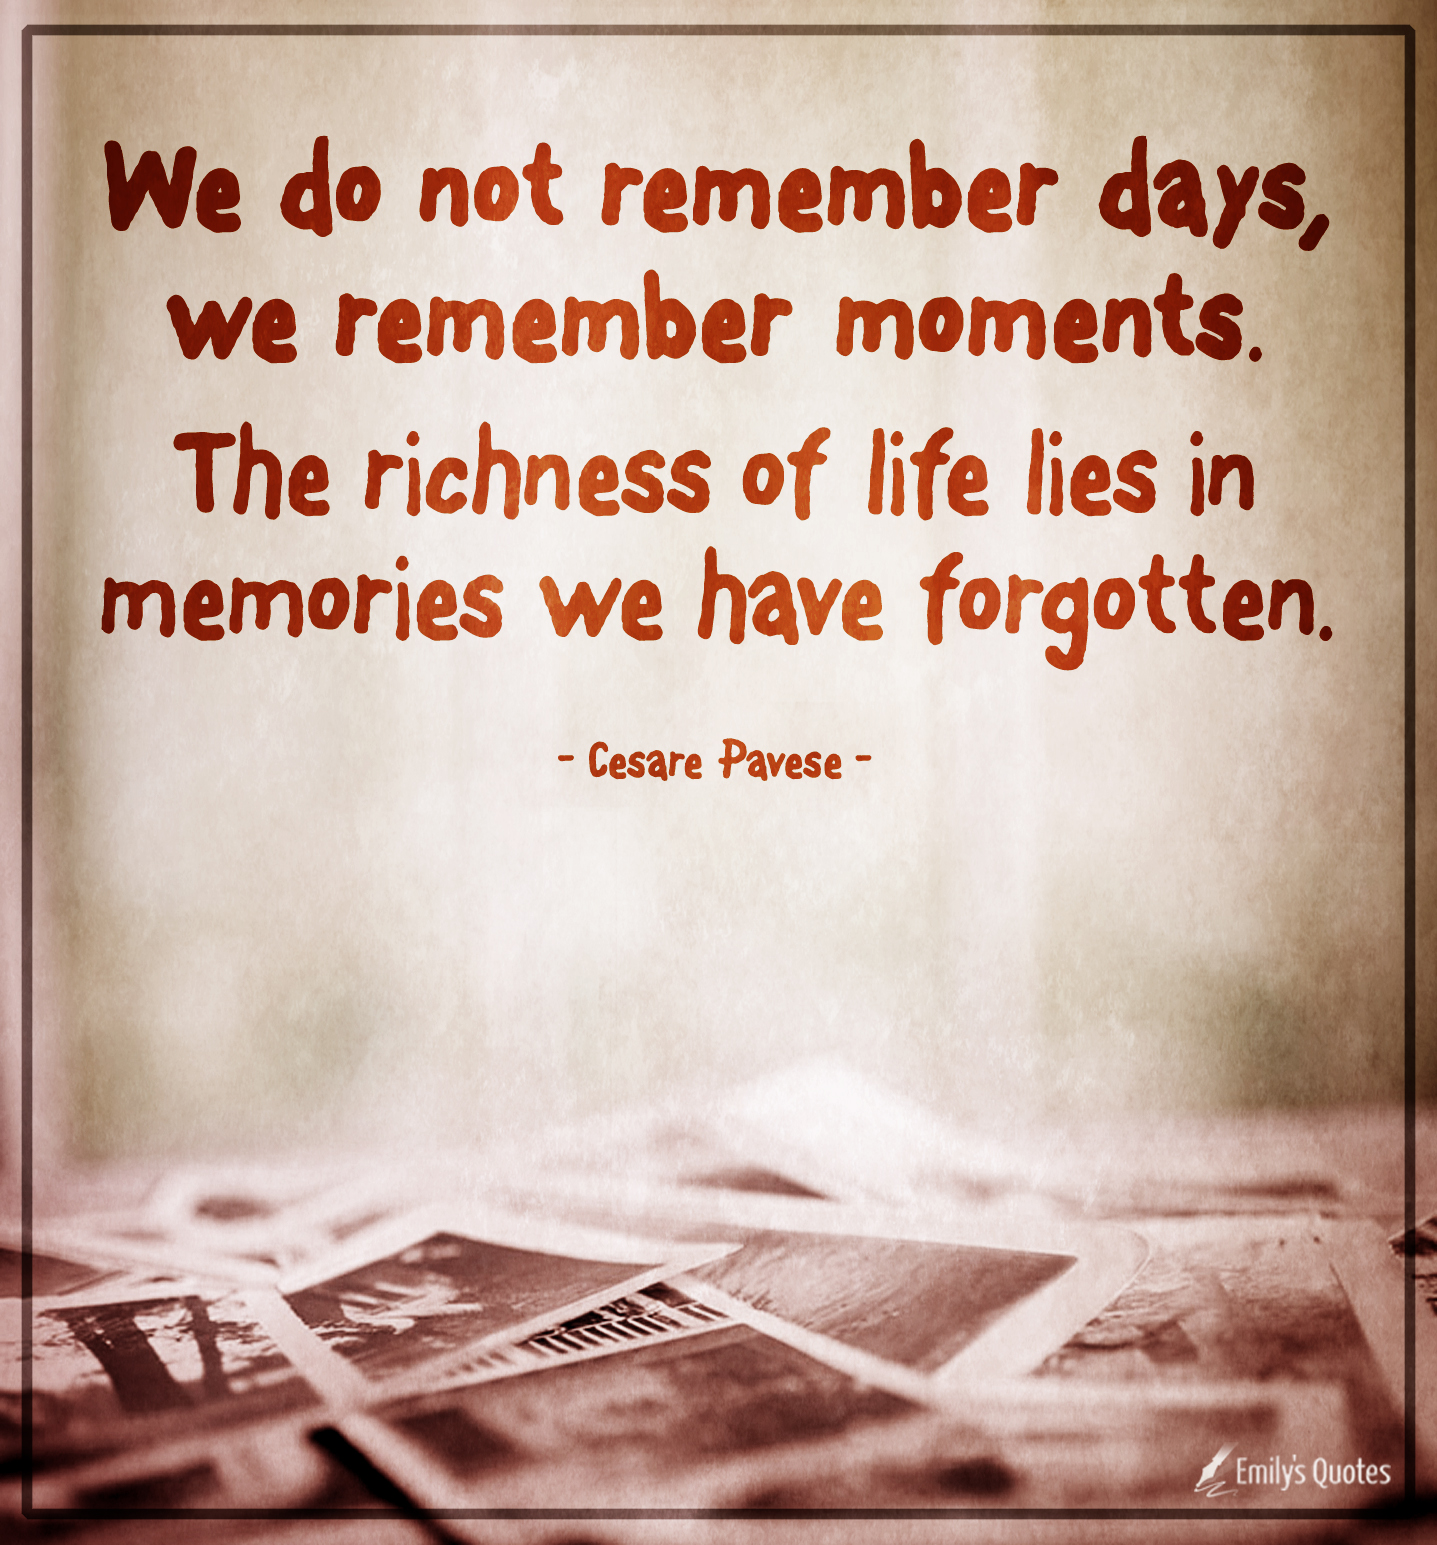 Remember the moment. We do not remember Days. We do not remember Days, we remember moments. Remember picture. The day we remember